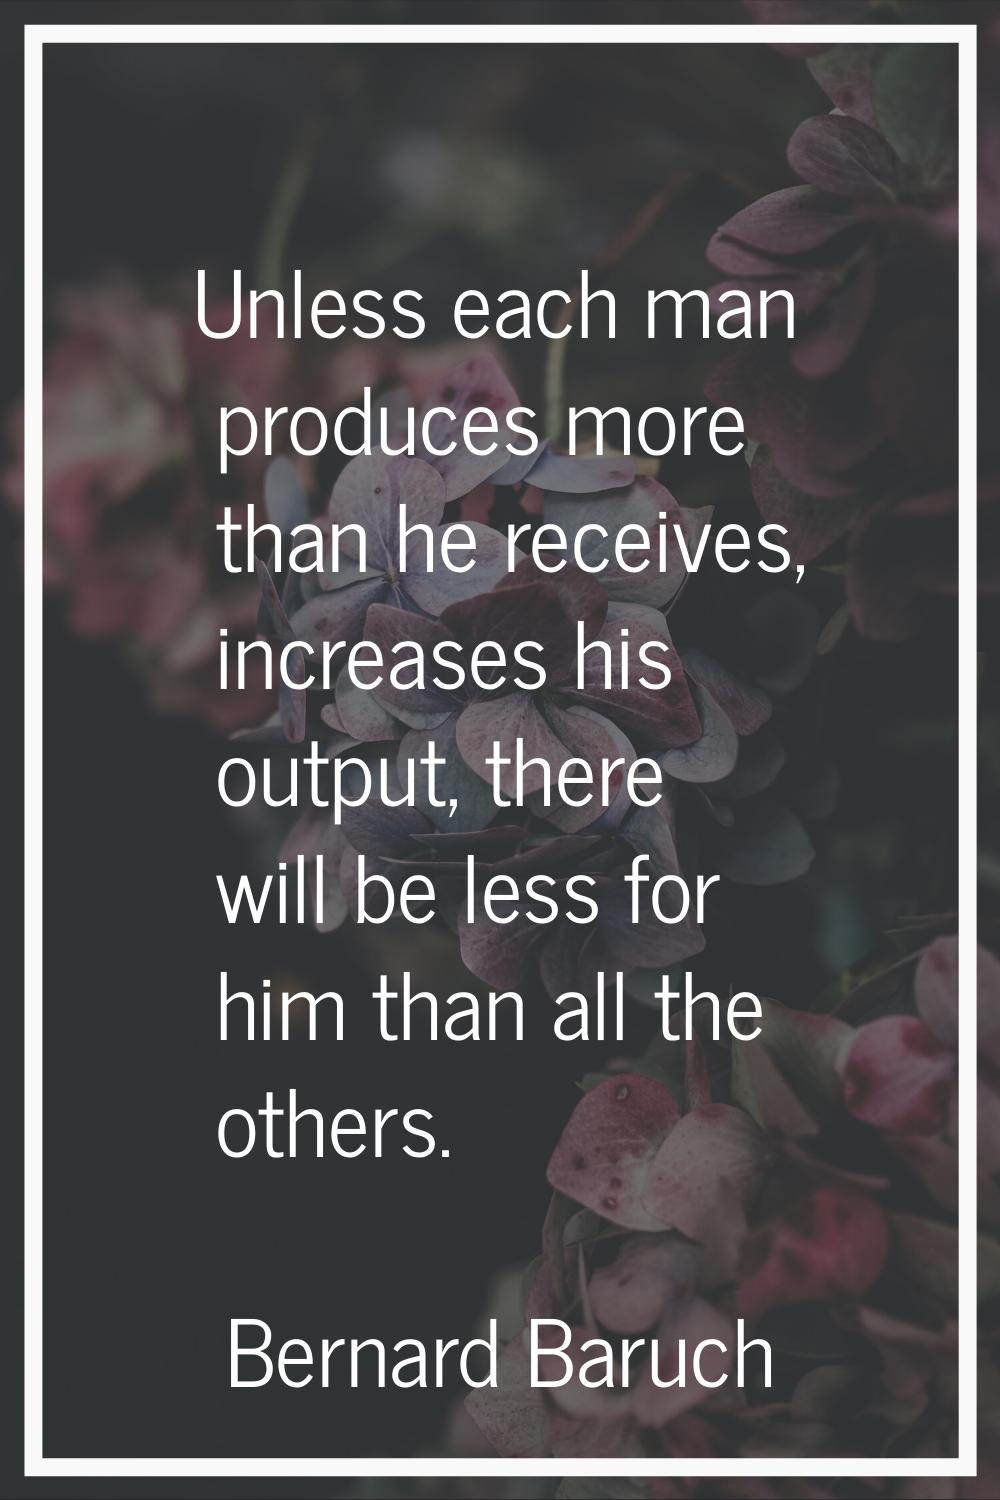 Unless each man produces more than he receives, increases his output, there will be less for him th